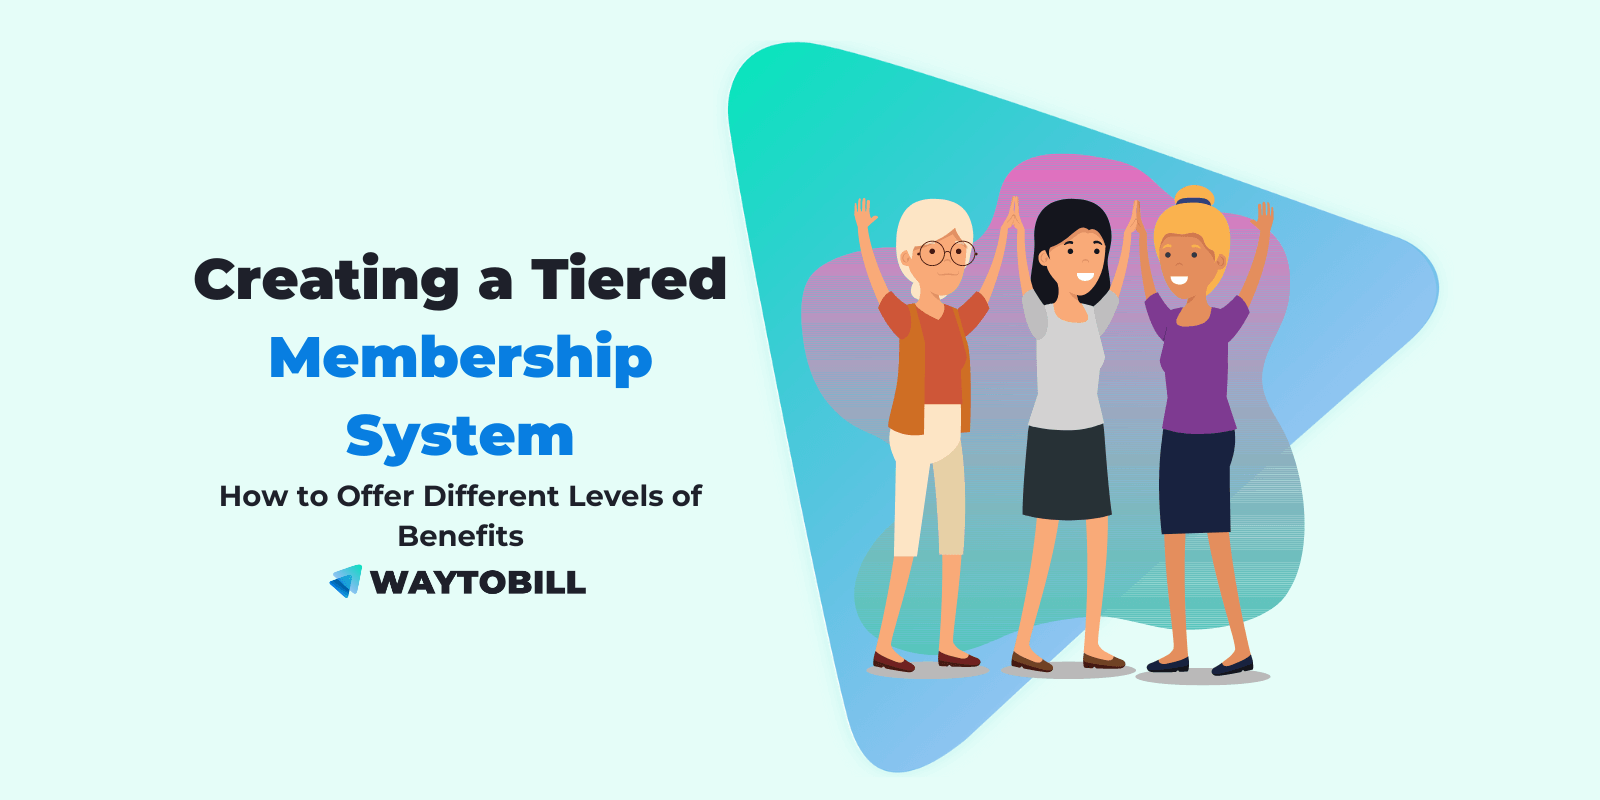 Creating a Tiered Membership System: How to Offer Different Levels of Benefits to Members